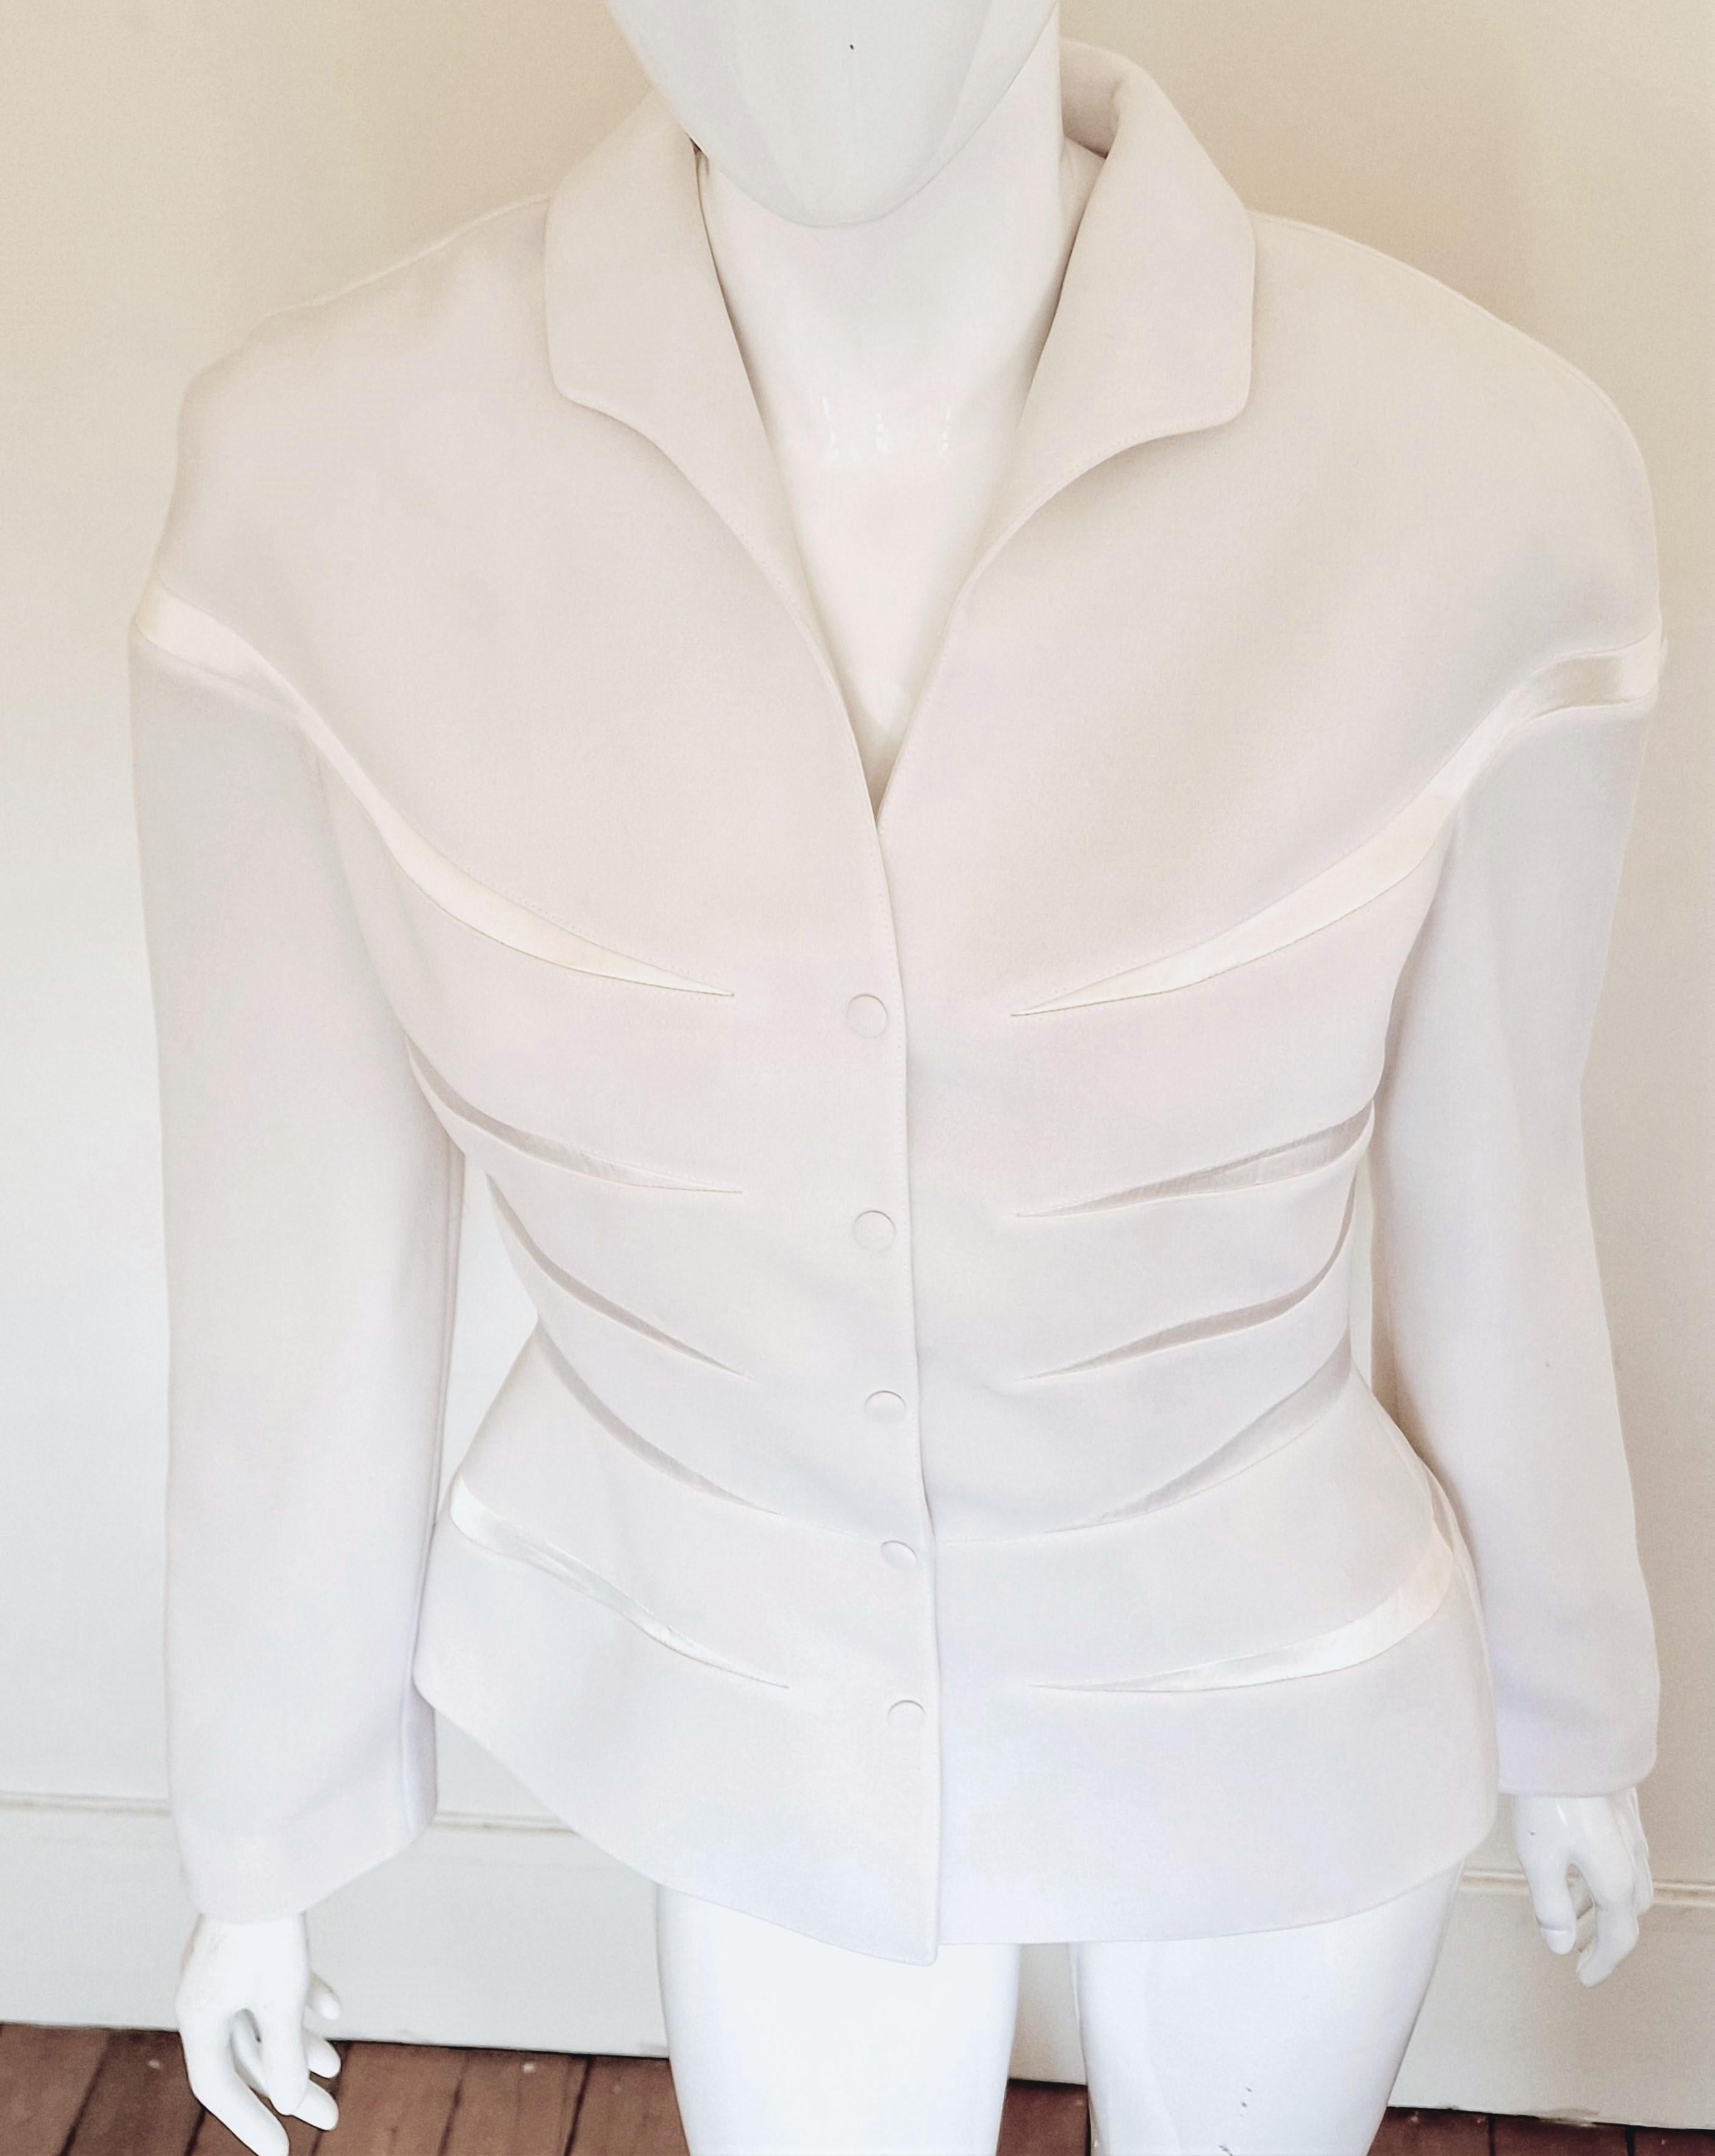 Beautiful piece by Thierry Mugler!
with shoulder pads!
Wonderful silhouette!
Wasp Waist look.

EXCELLENT Condition.

SIZE
Large.
Marked size: FR40.
Length: 56 cm / 22 inch
Armpit to armpit: 46 cm / 18 inch
Waist: 36 cm / 14.2 inch
Shoulder to